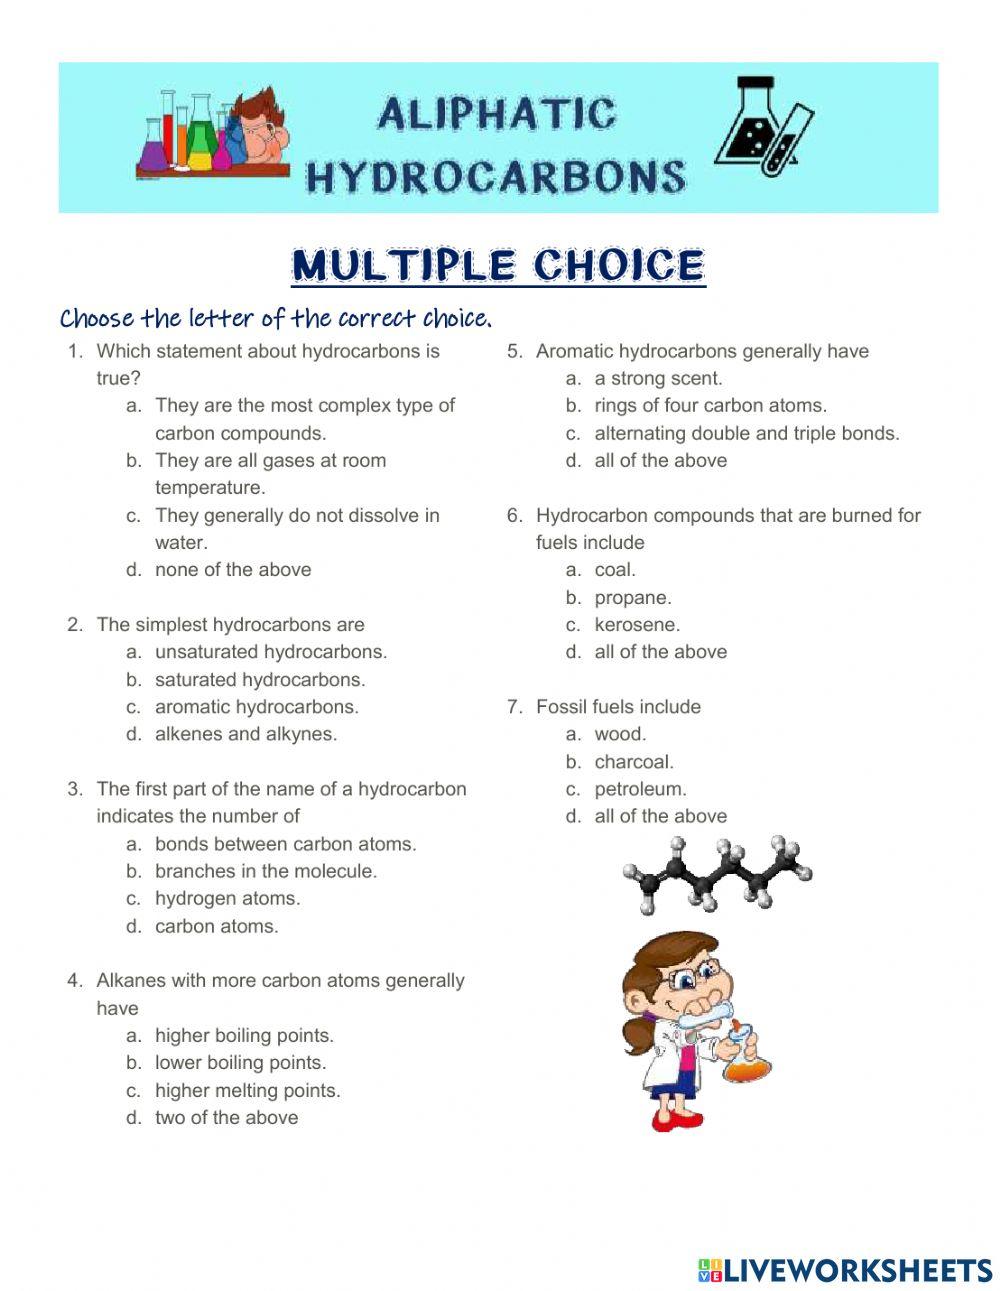 Aliphatic hydrocarbons multiple choice